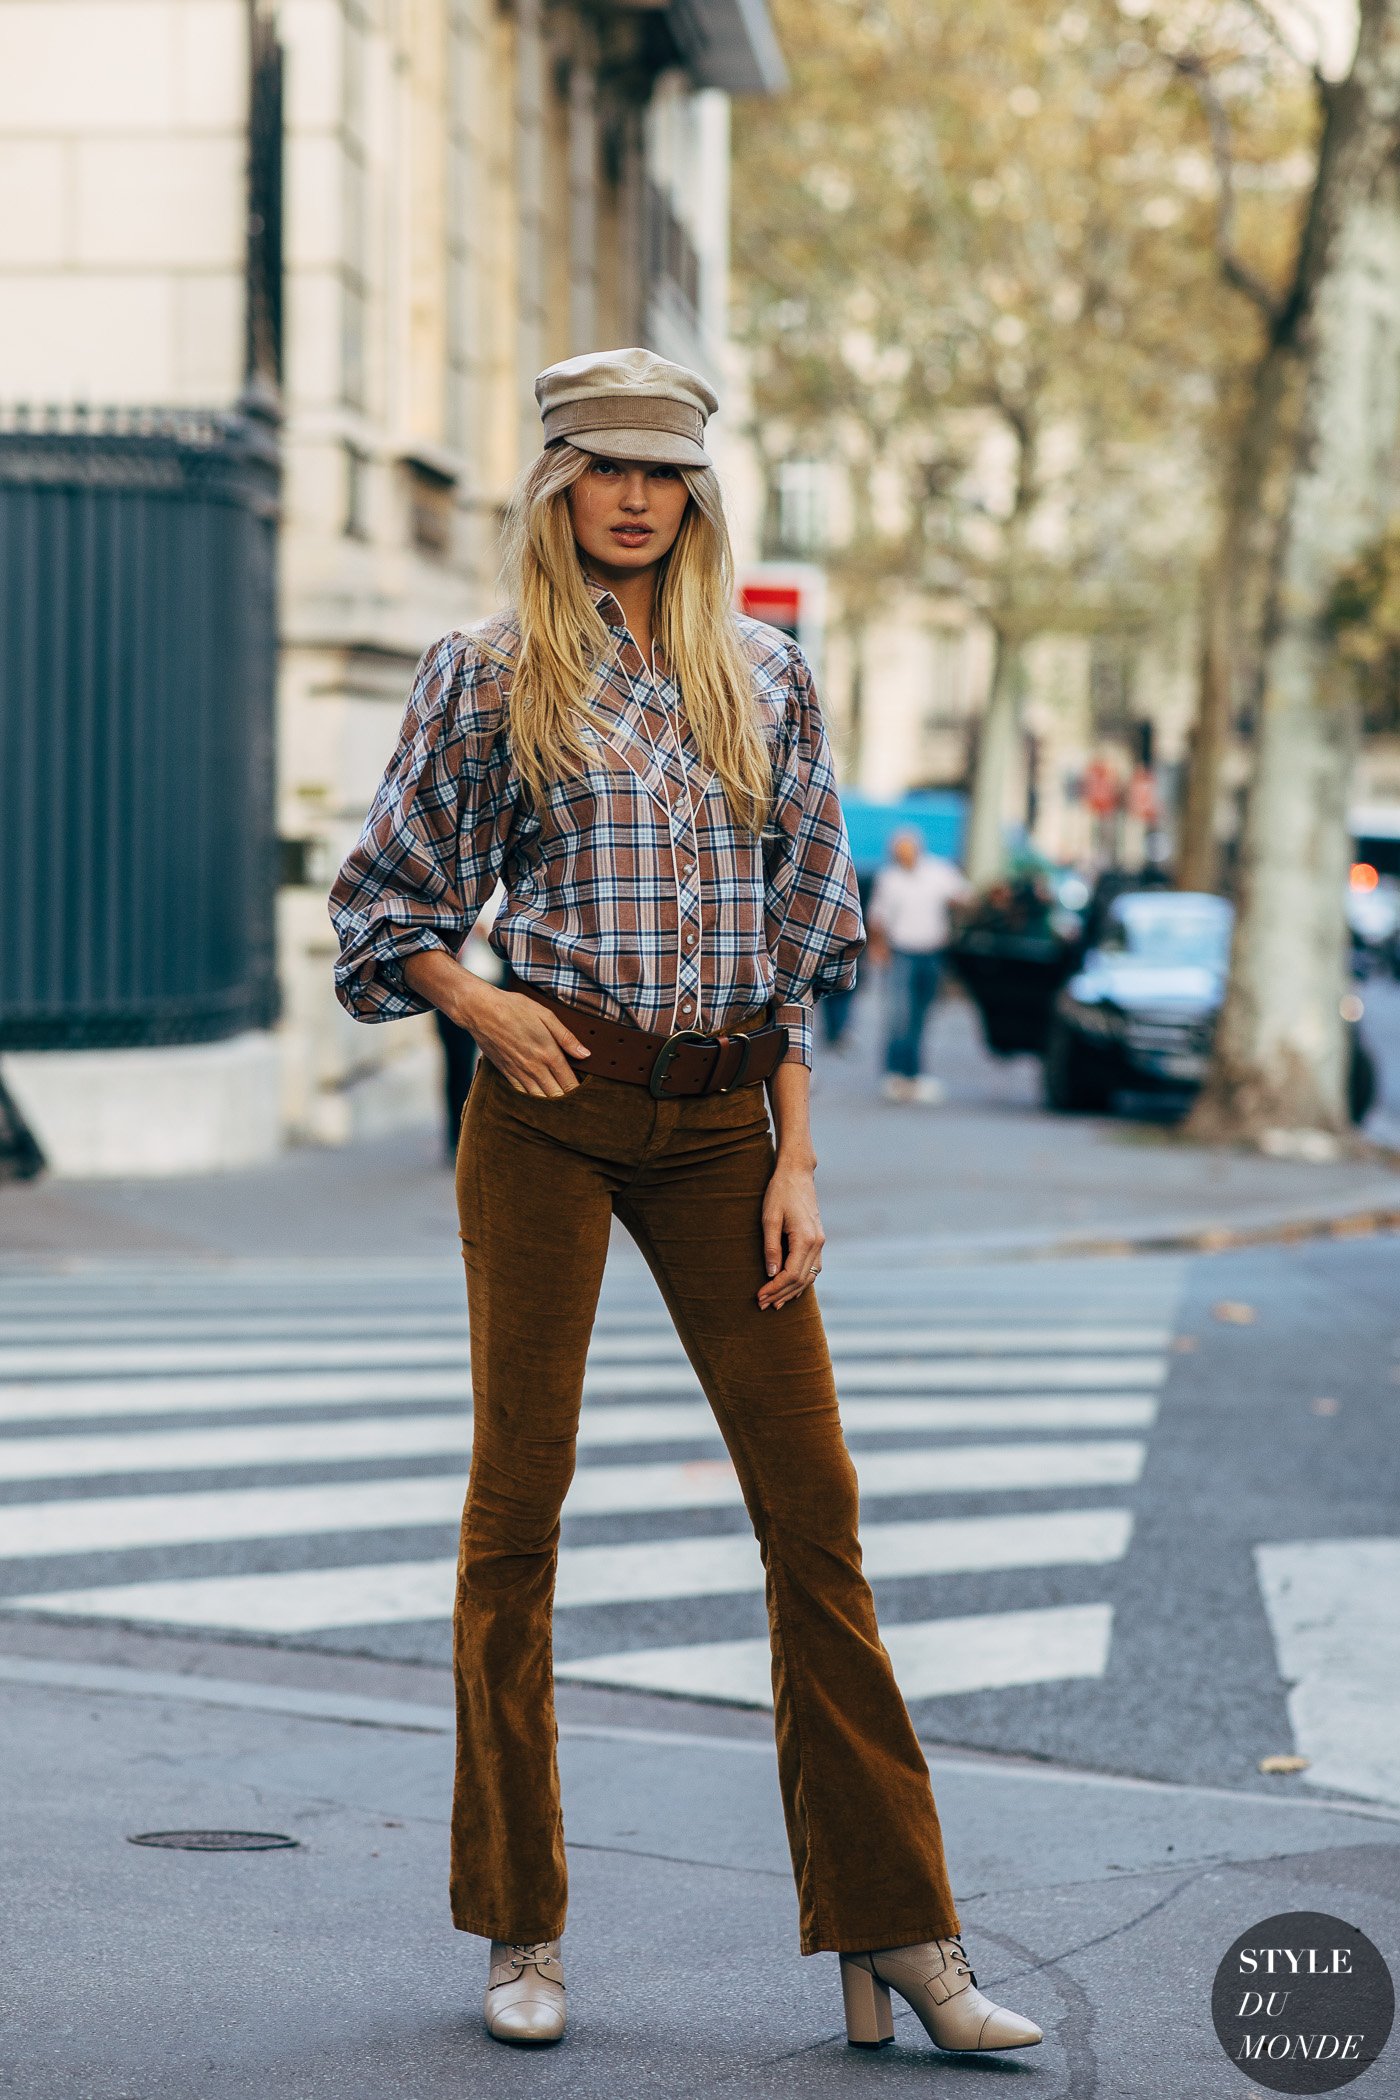 Romee-Strijd-by-STYLEDUMONDE-Street-Style-Fashion-Photography20180928_48A3820.jpg